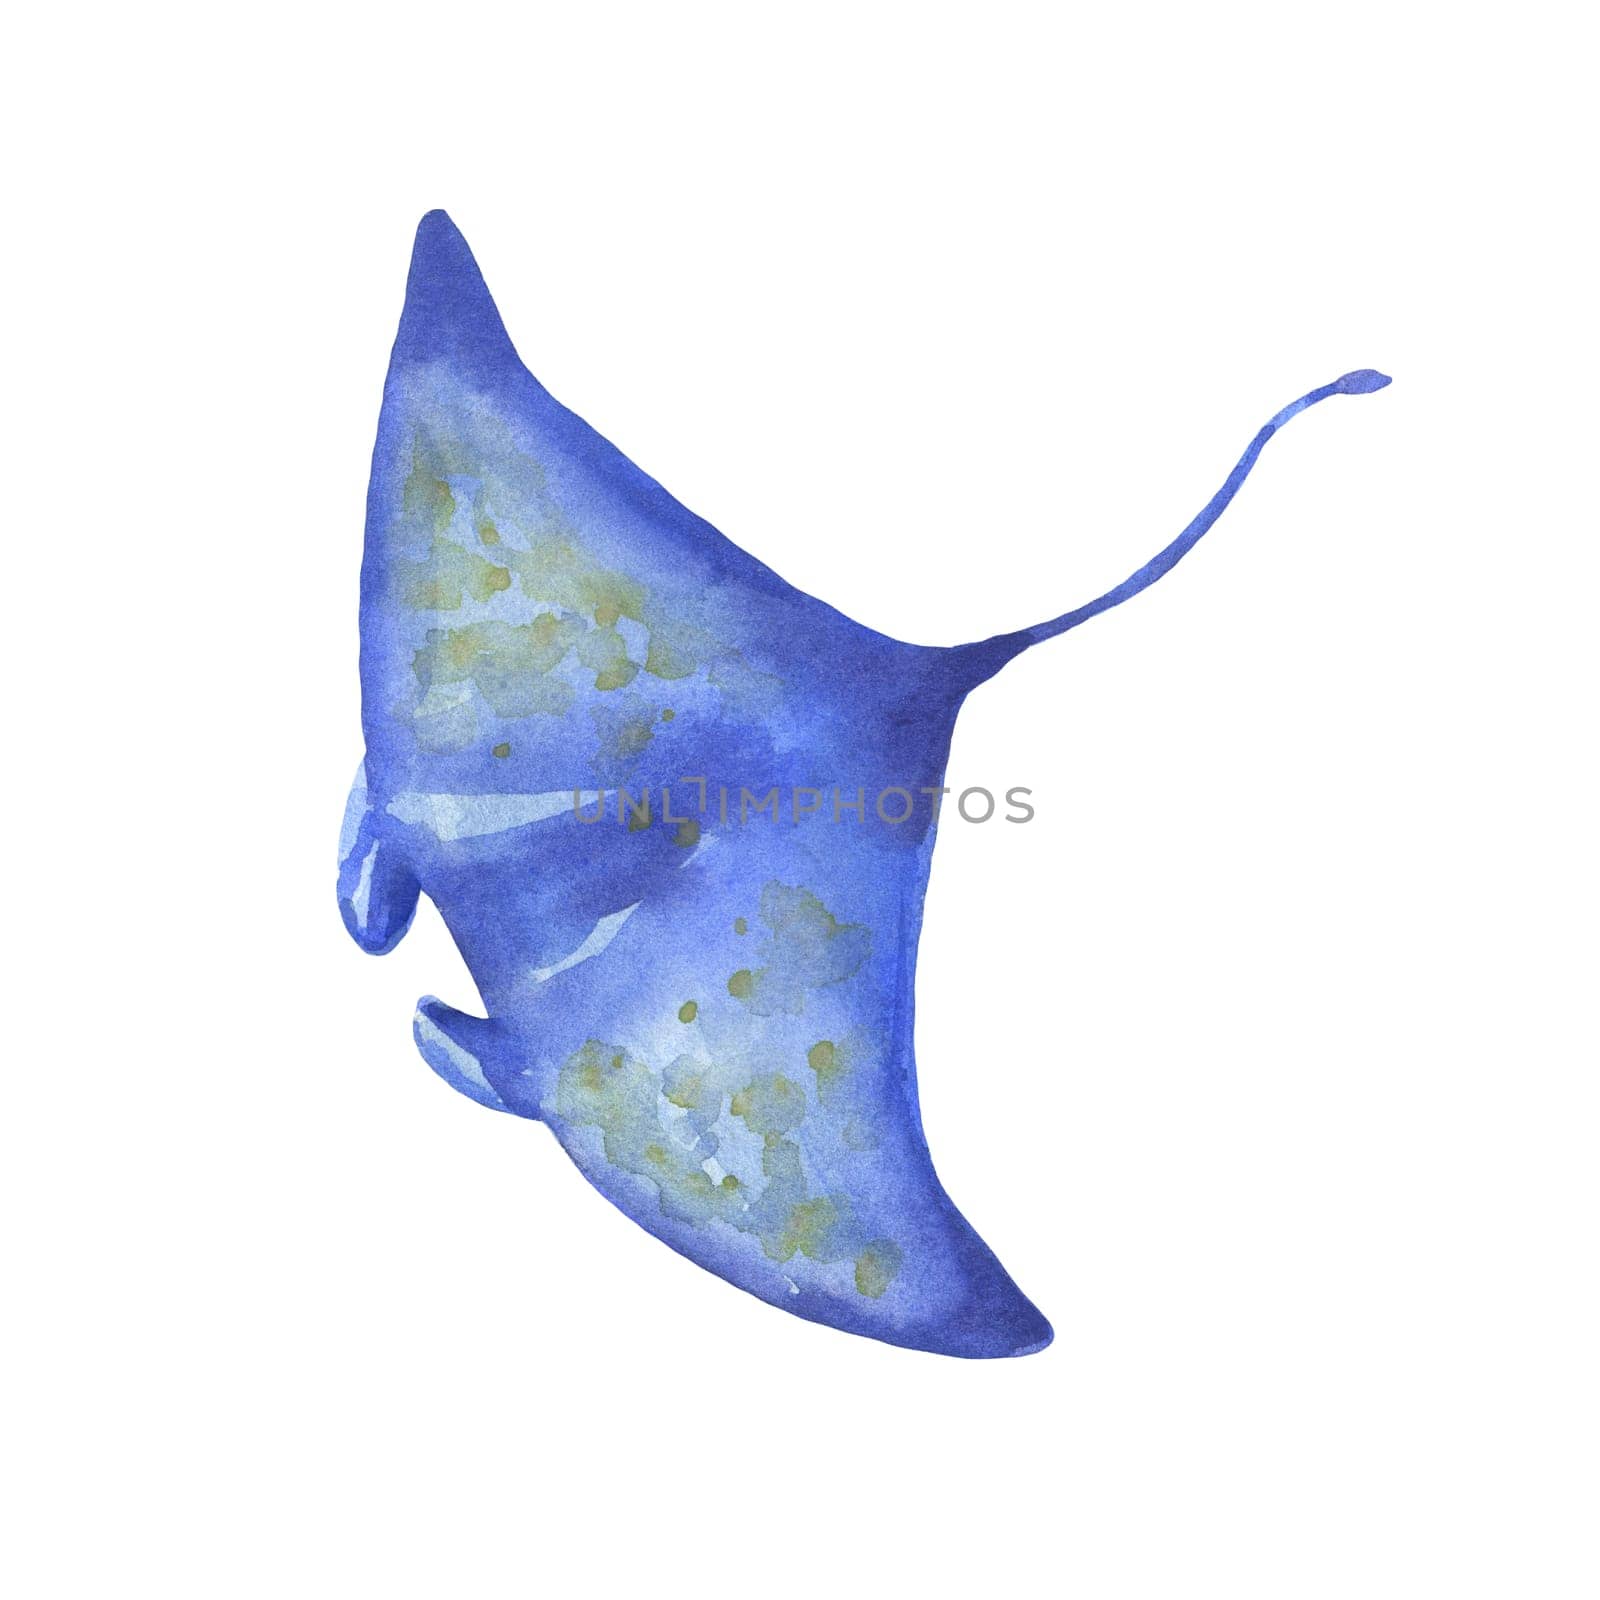 Watercolor blue spotted stingray isolated on white. Hand painted underwater animal illustration by ElenaPlatova